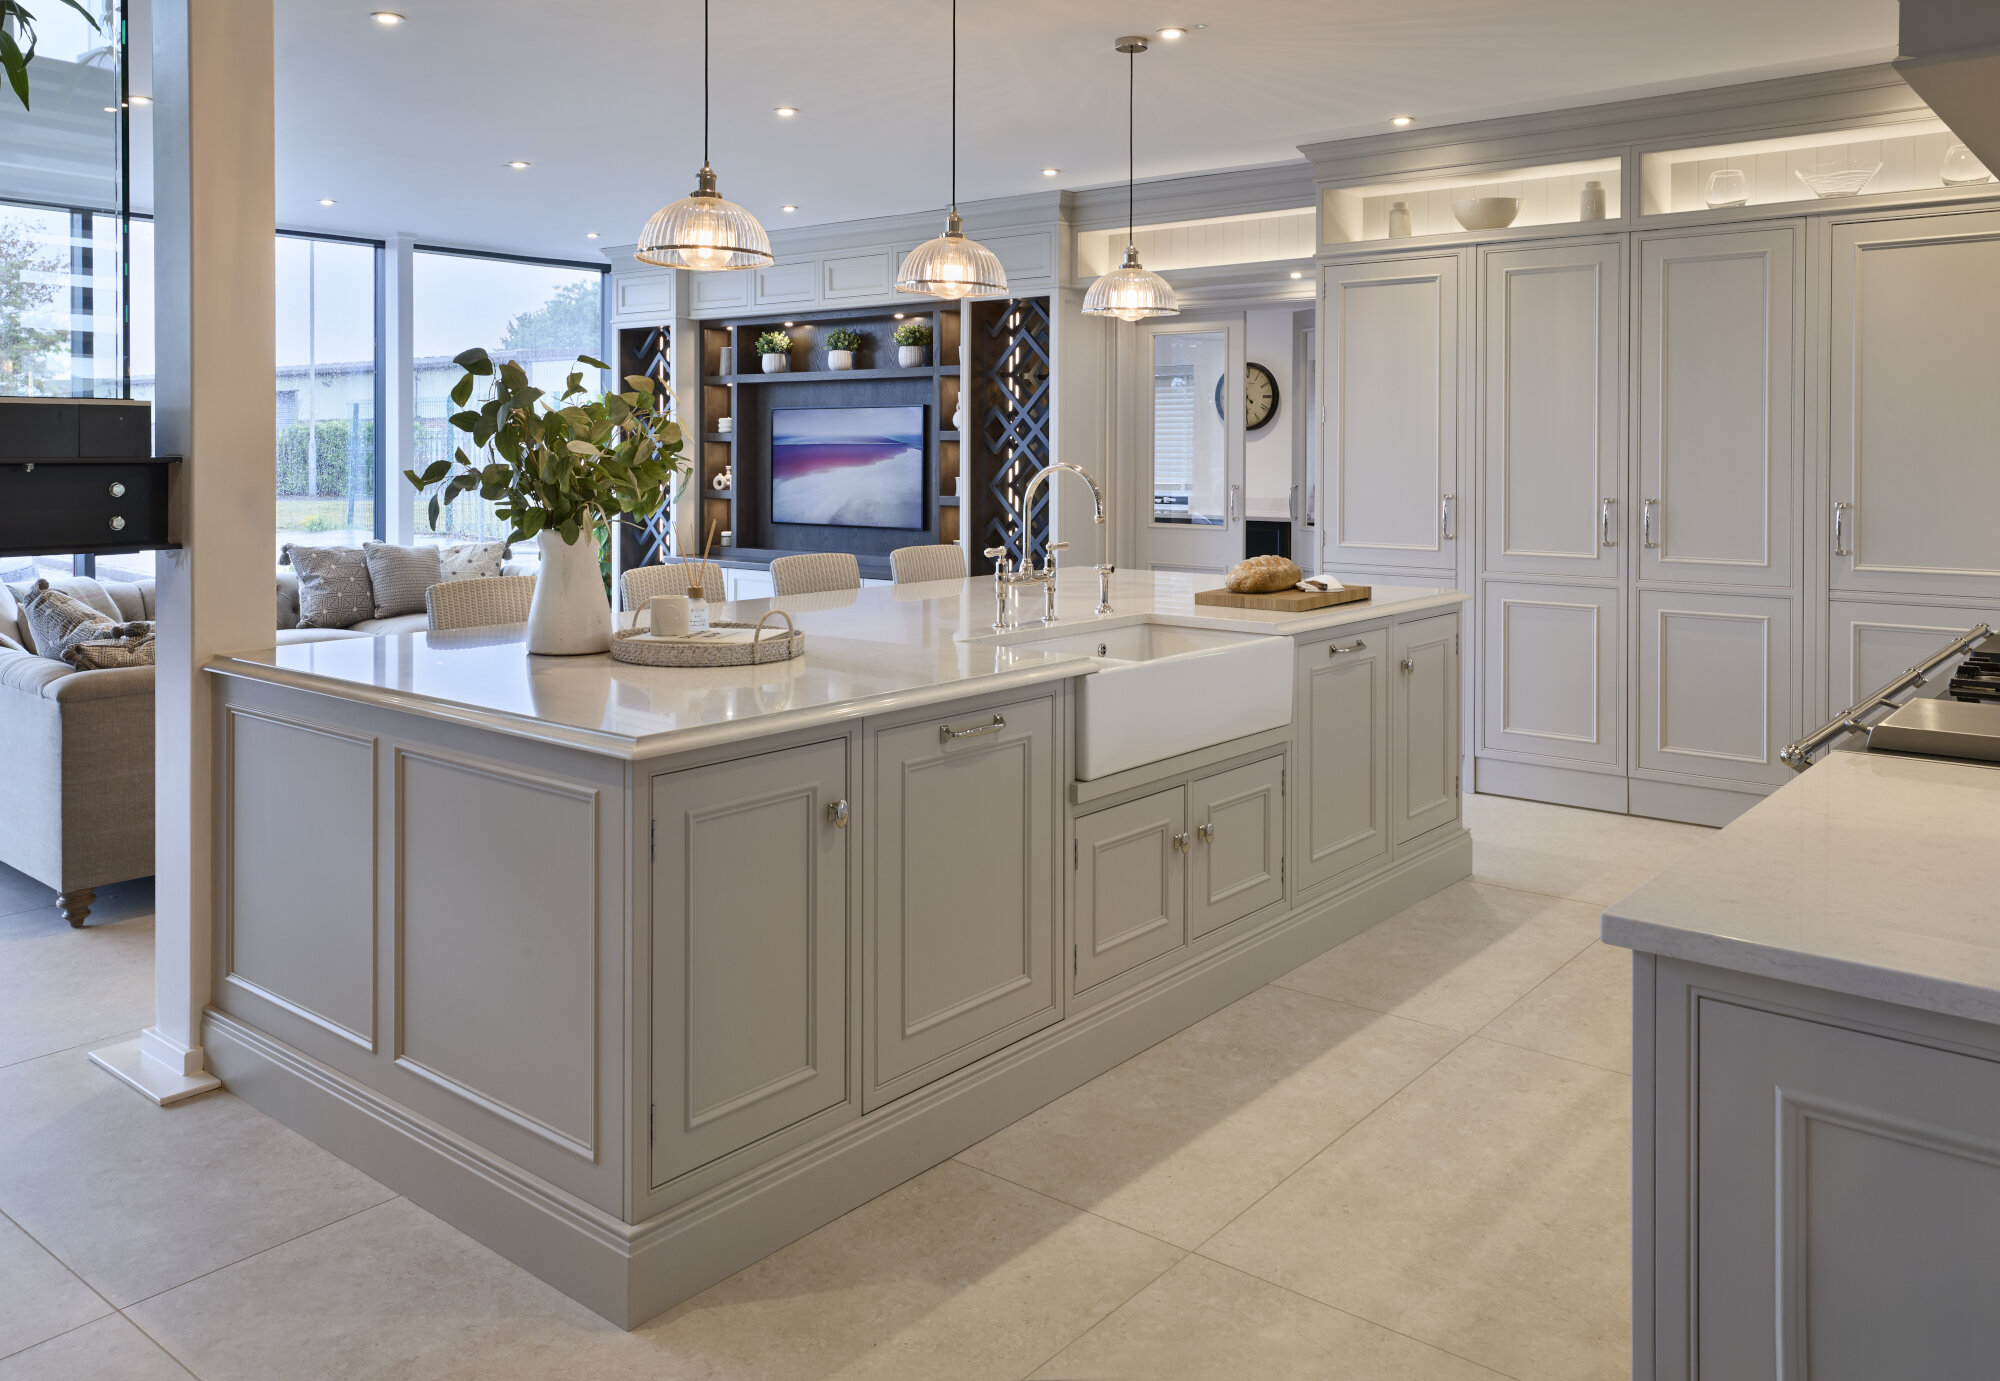 This Bespoke Kitchen Design is on display in our showroom near Matlock